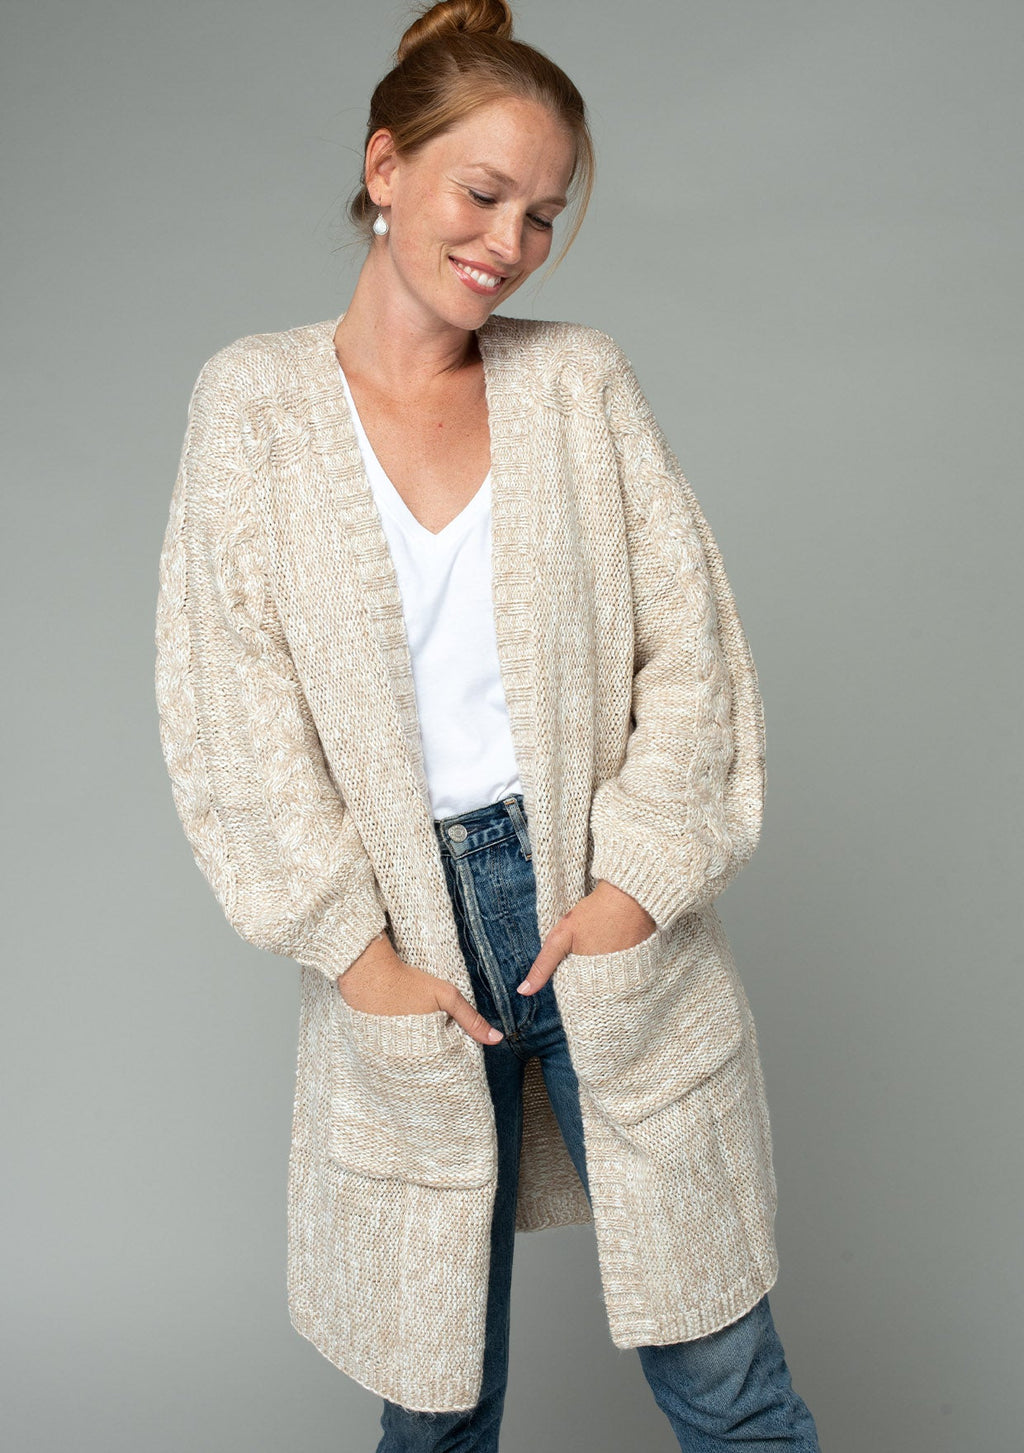 Women's Cardigan - Chunky Knit Cardigan + Cable Knit | LOVESTITCH